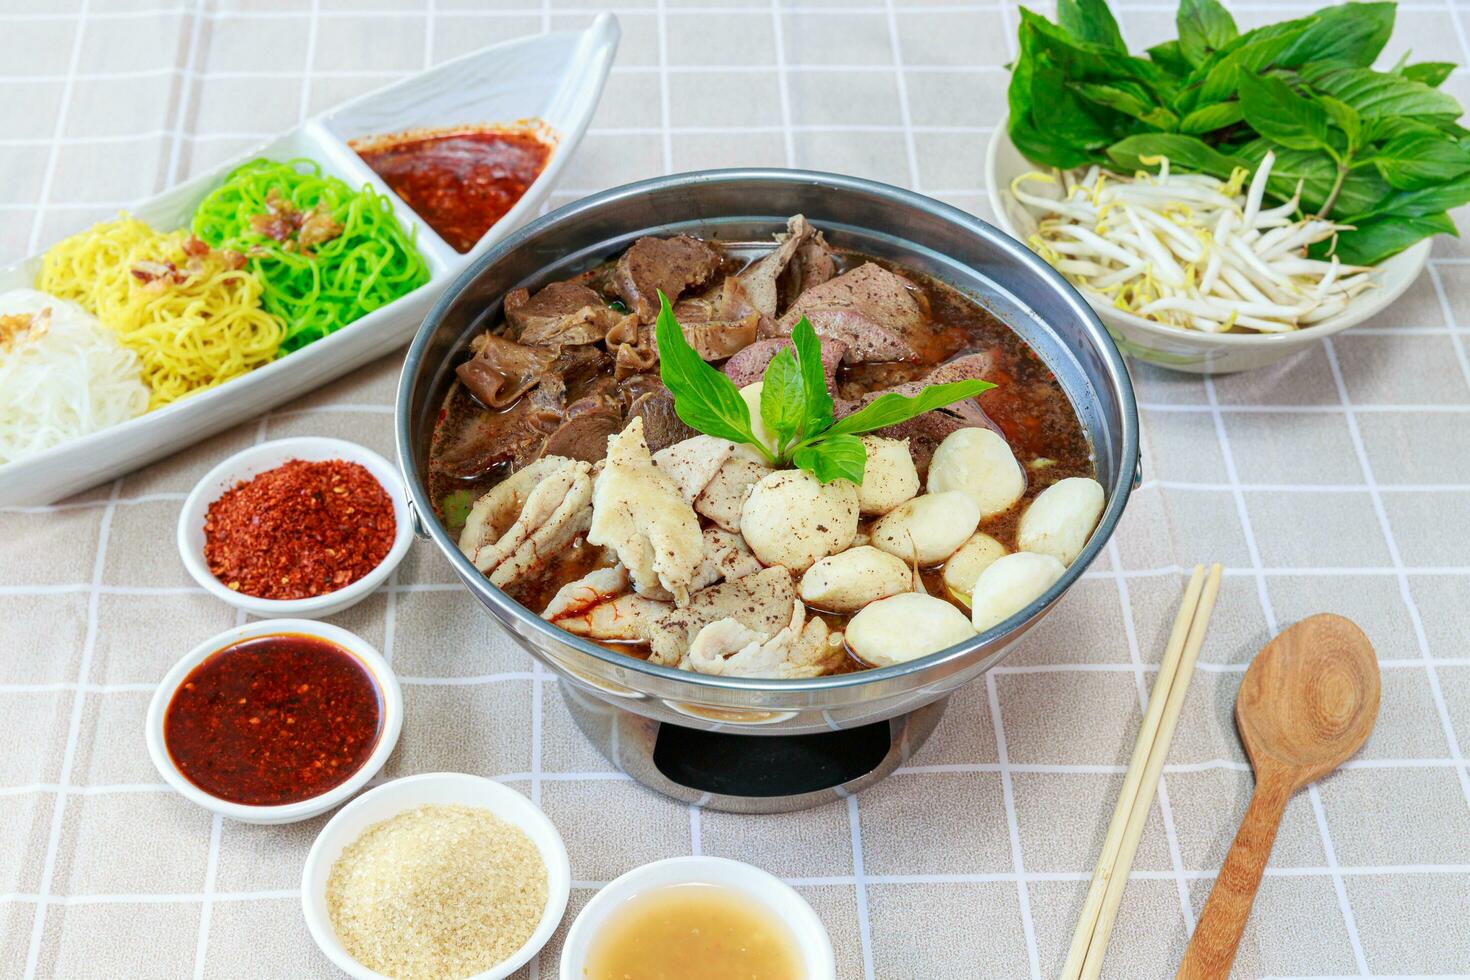 Braised Beef Soup in Hot Pot. One type of noodle dish that is popular in Thailand is called Boat Noodle Hot Pot. Served with different kinds of noodles such as rice vermicelli, thin noodles photo